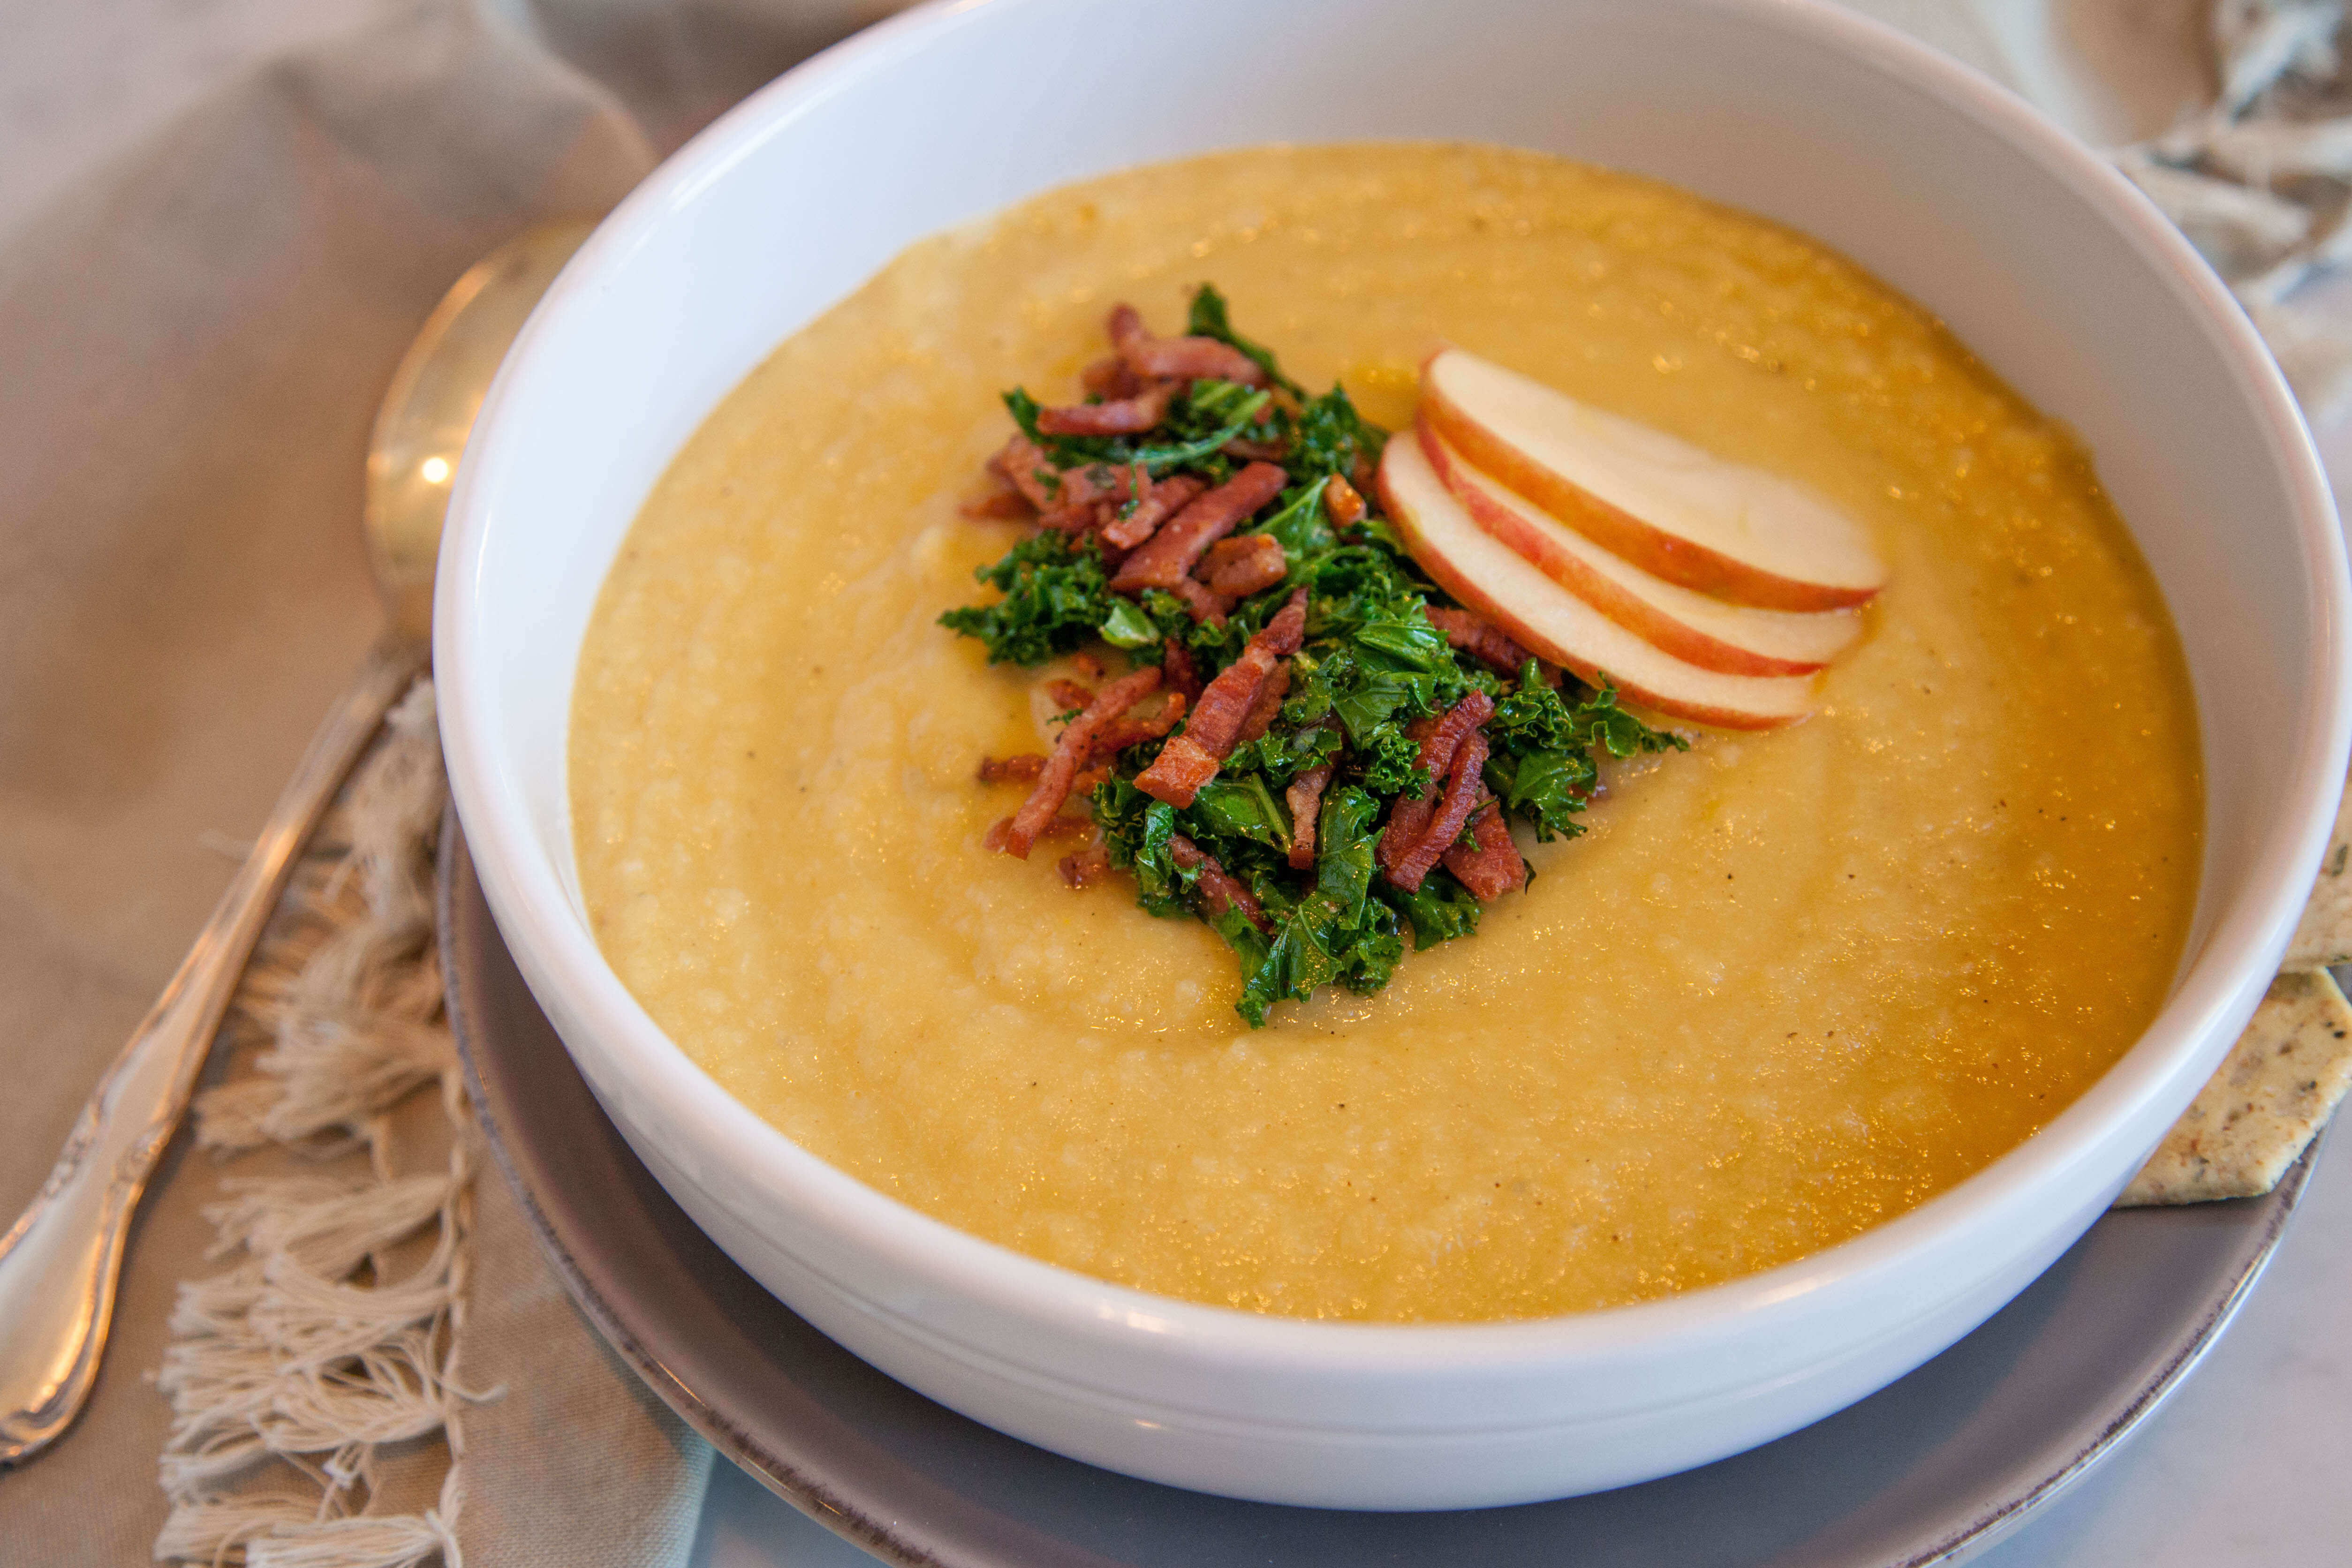 Roasted Apple & Parsnip Soup, topped with Sautéed Garlicky Kale and Turkey Bacon